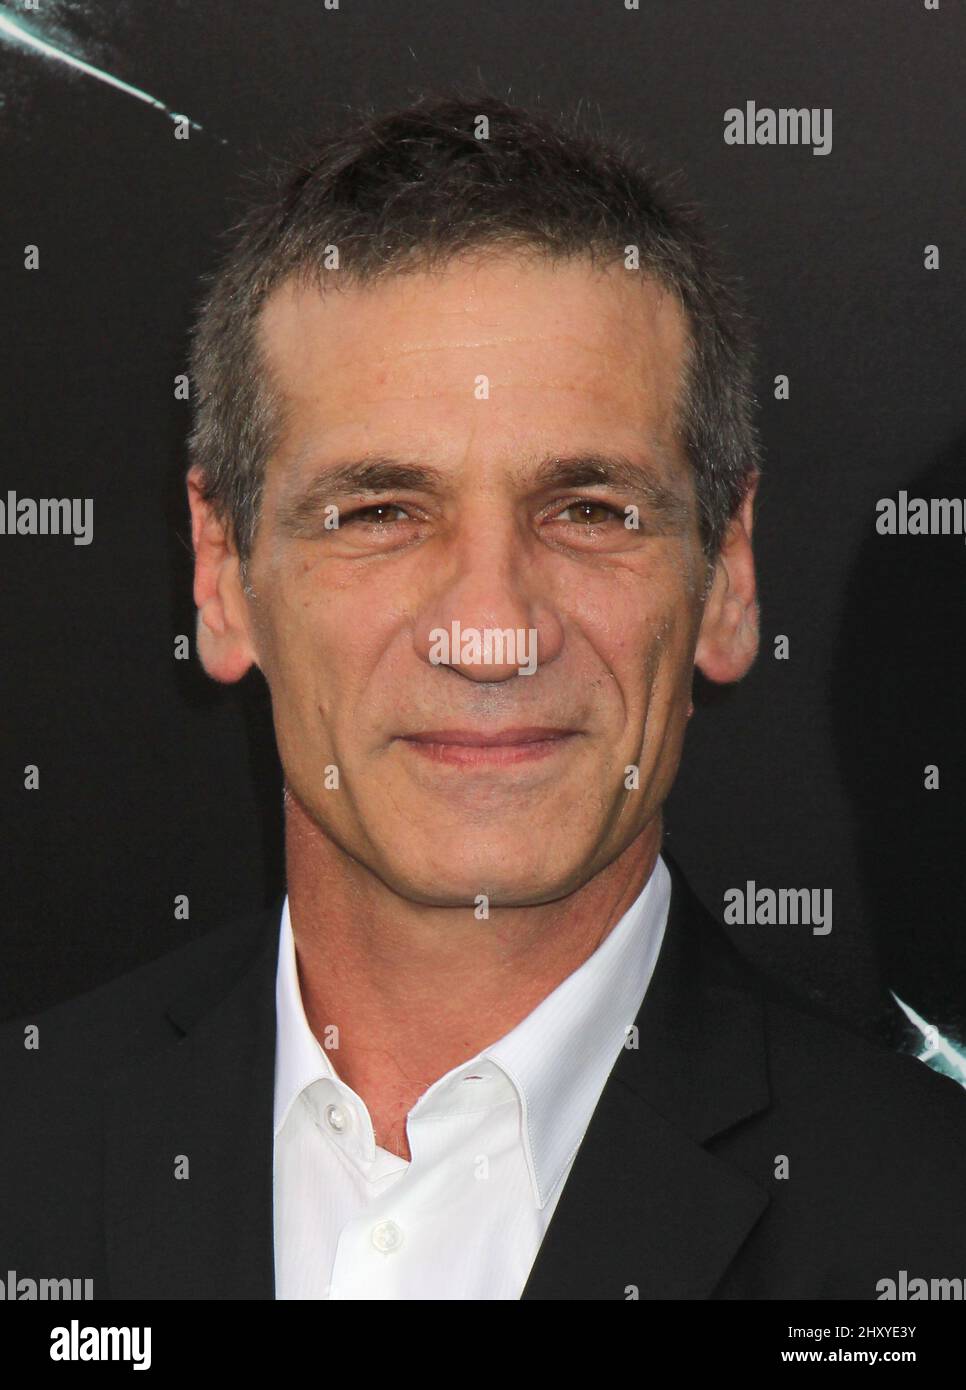 Alon Aboutoul attends 'The Dark Knight Rises' New York premiere held at AMC Lincoln Square Theatre, July 16 2012 New York City. Stock Photo